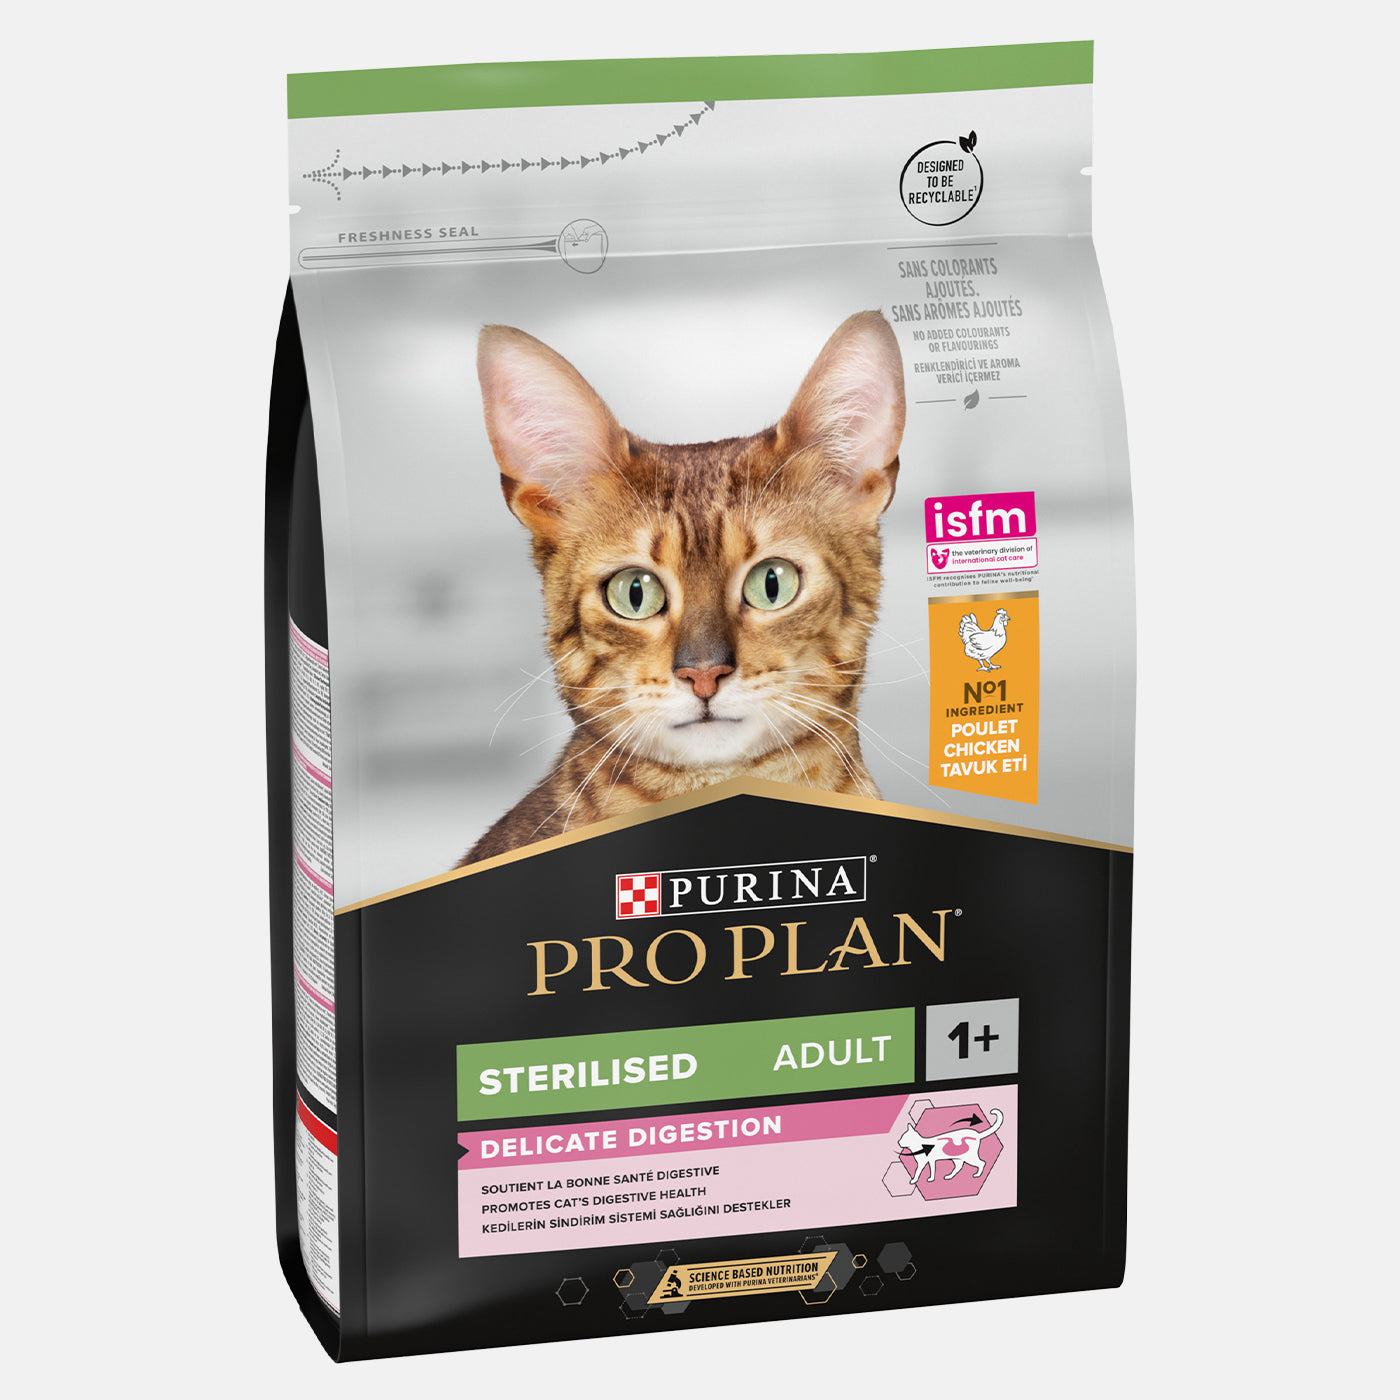 PRO PLAN Sterilised Delicate Digestion Adult Cat Dry Food With Chicken 3KG